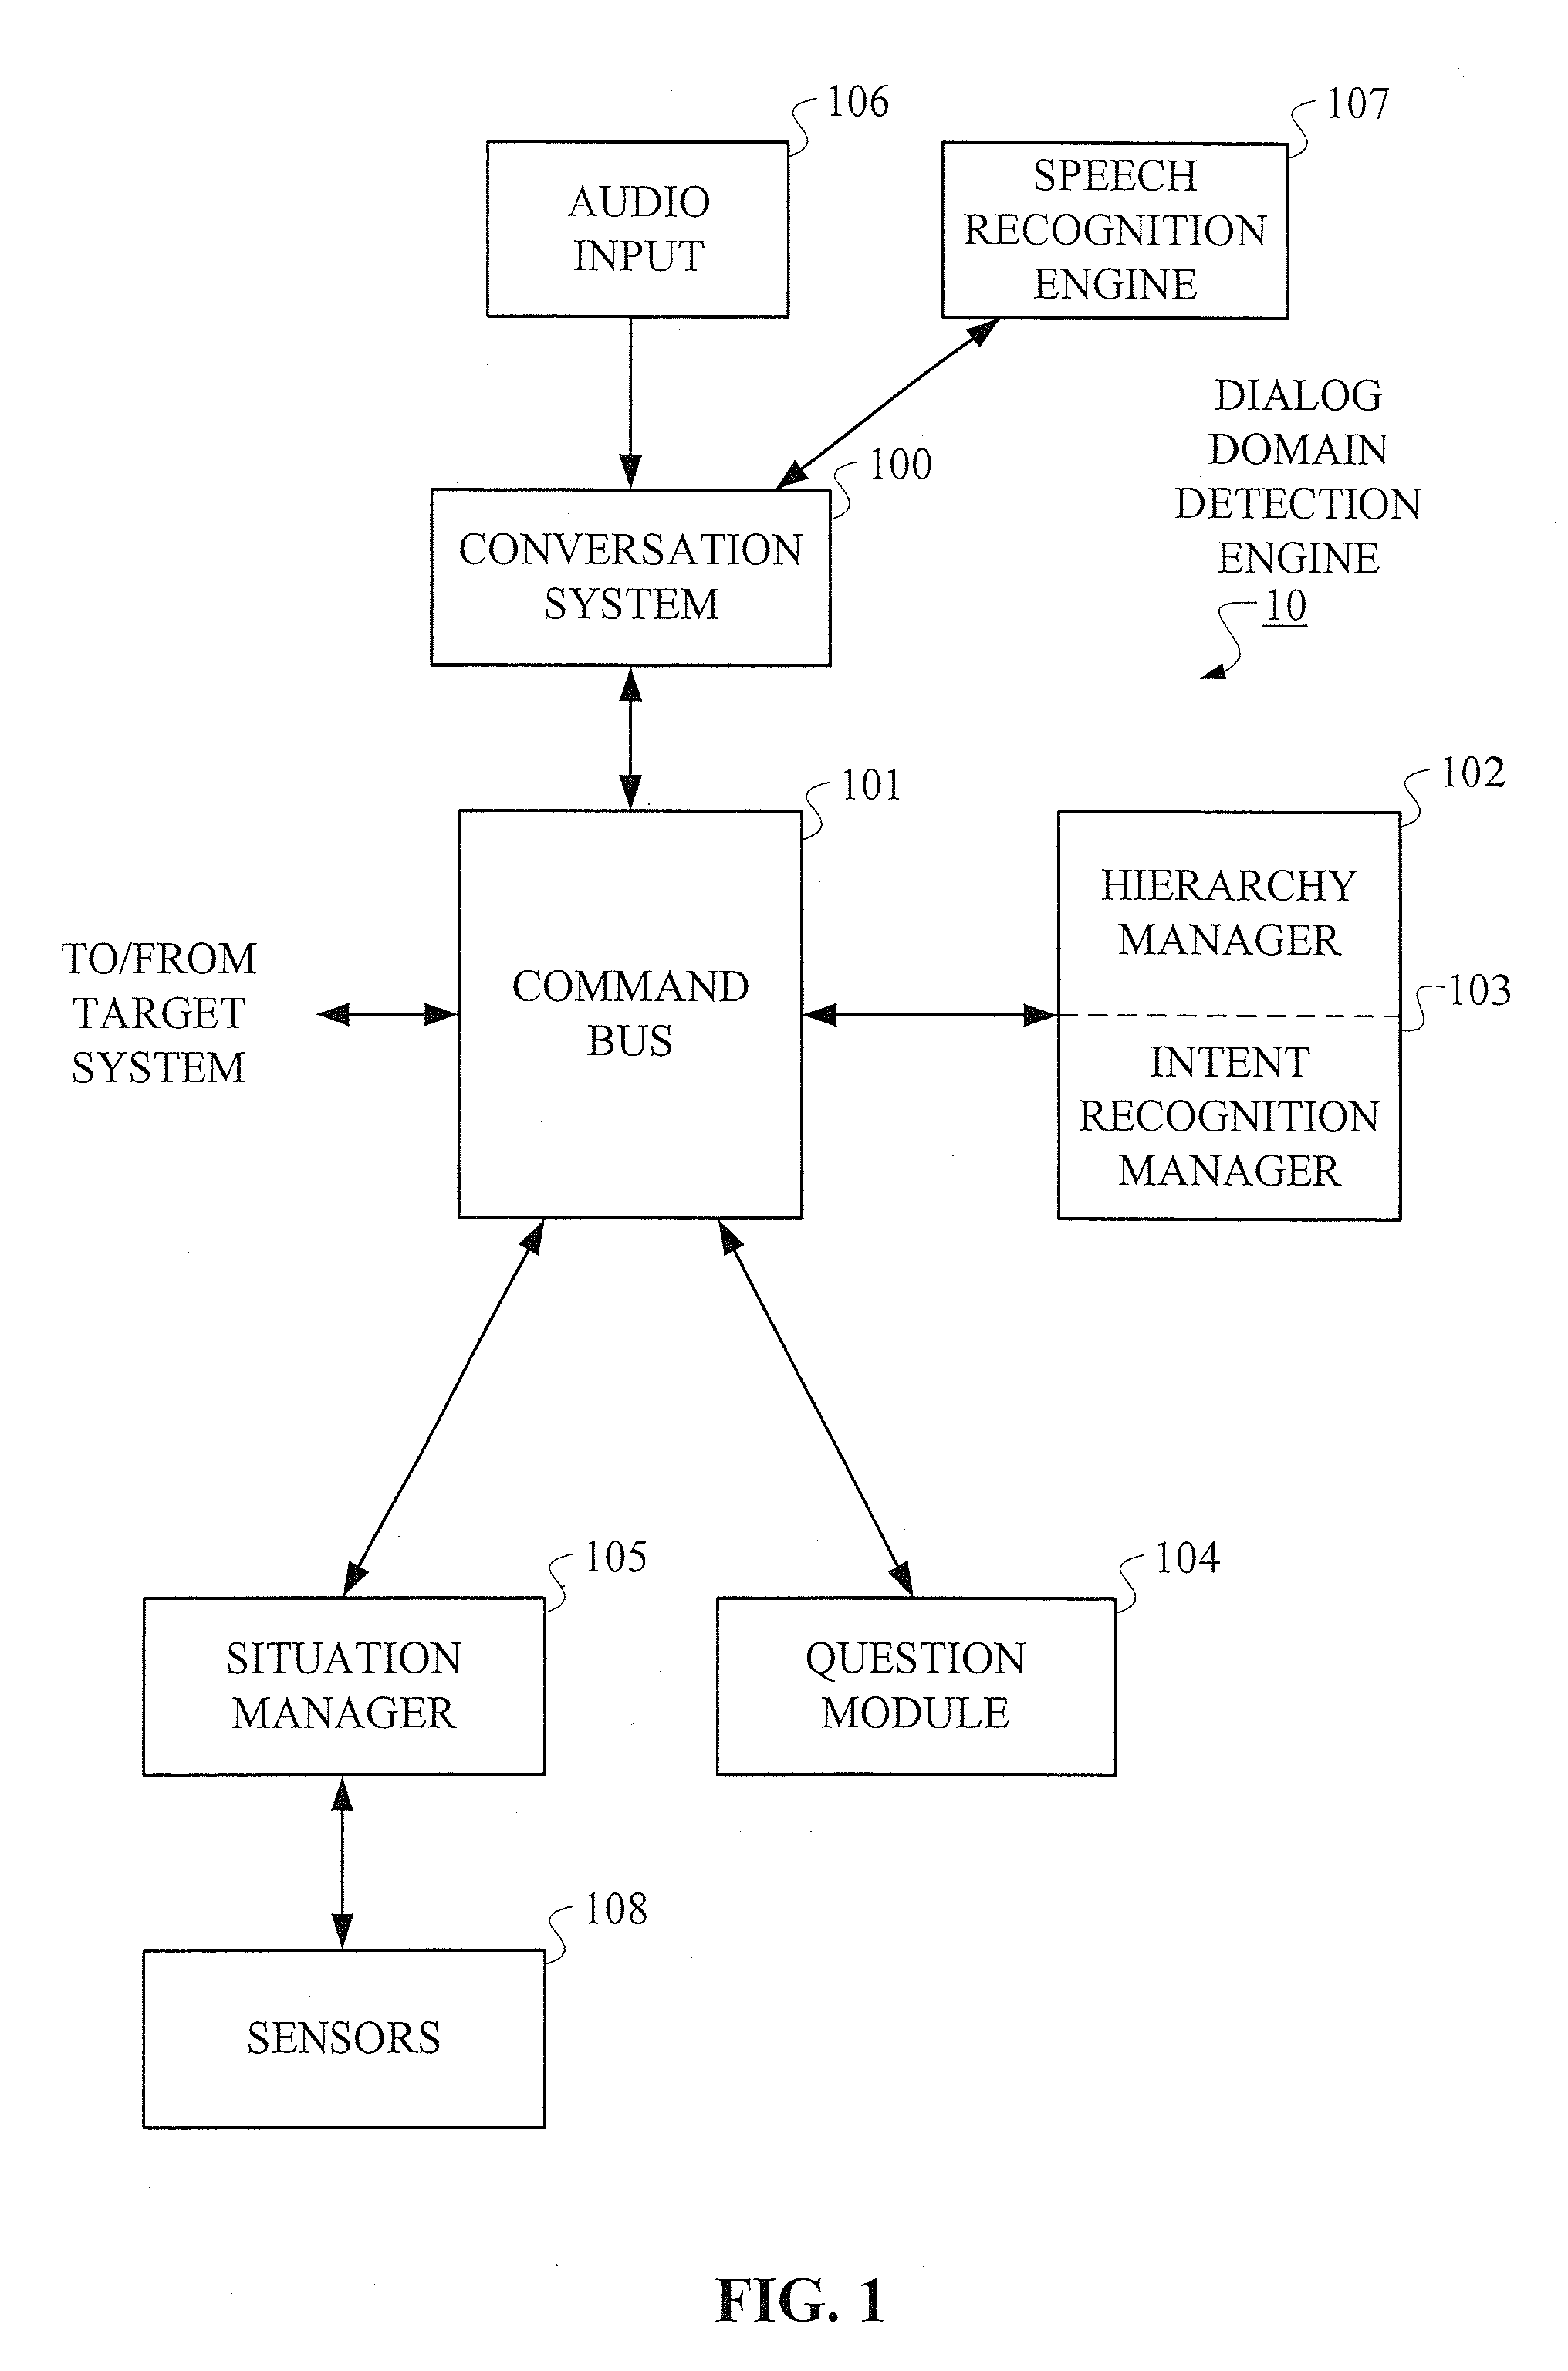 Hierarchical Methods and Apparatus for Extracting User Intent from Spoken Utterances